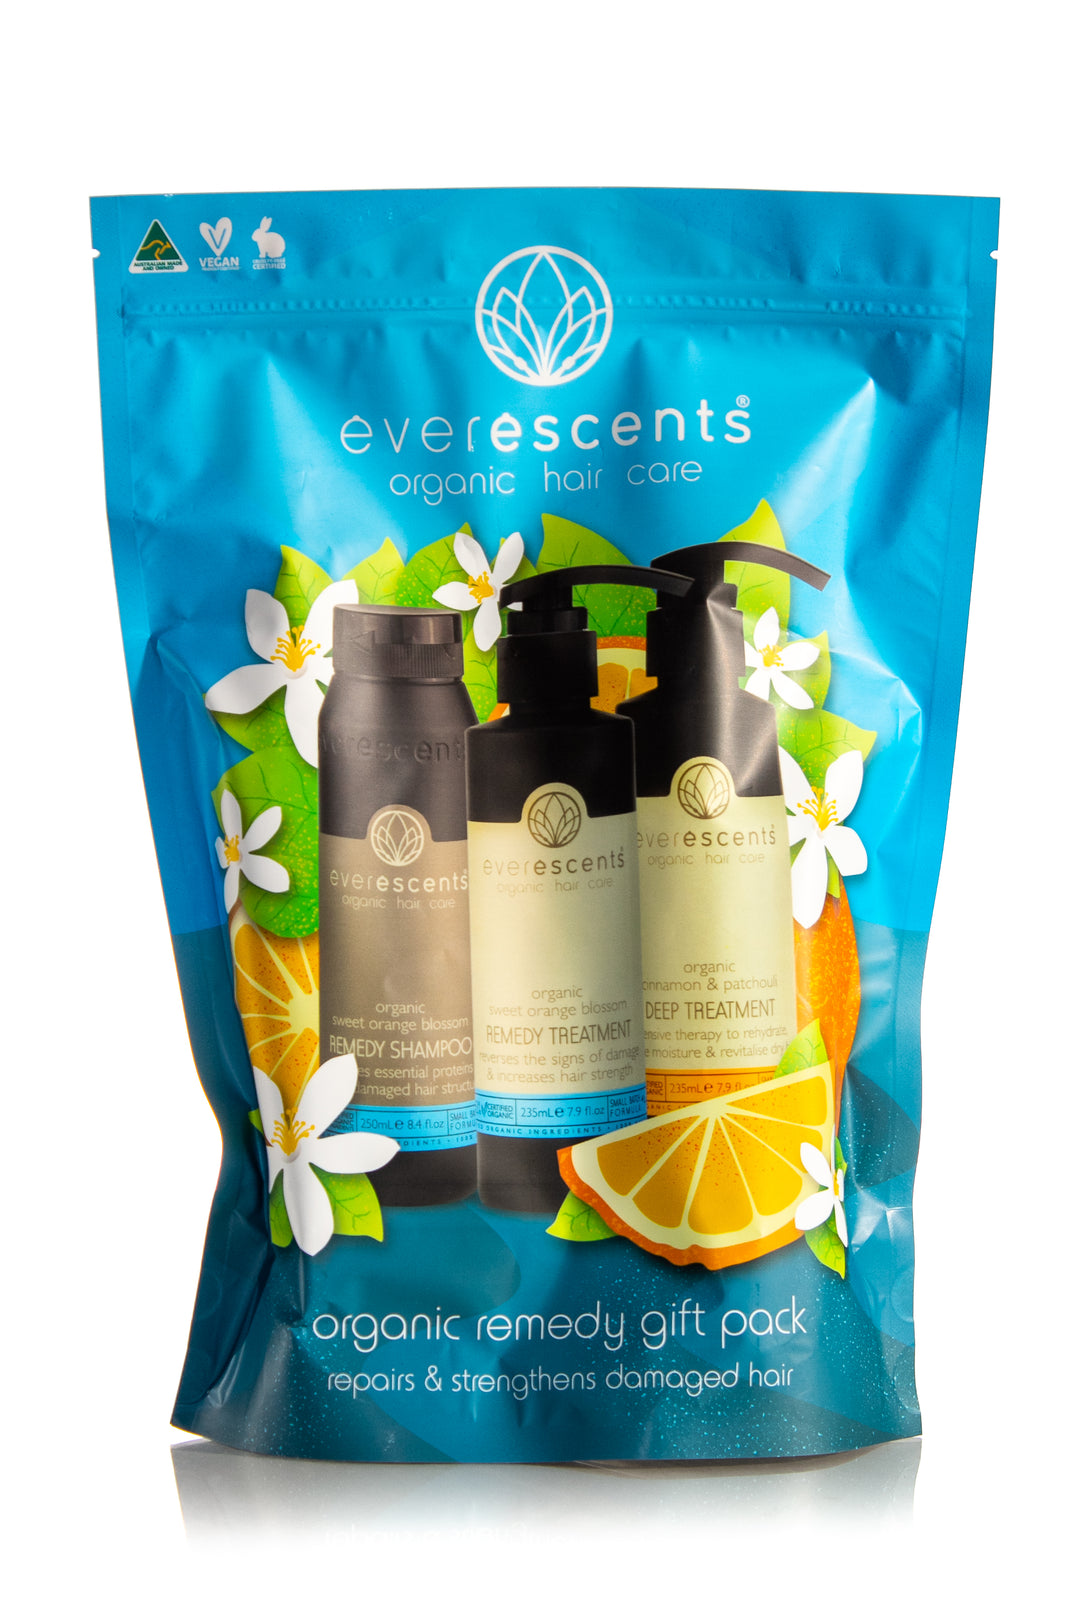 everecents-organic-remedy-gift-pack